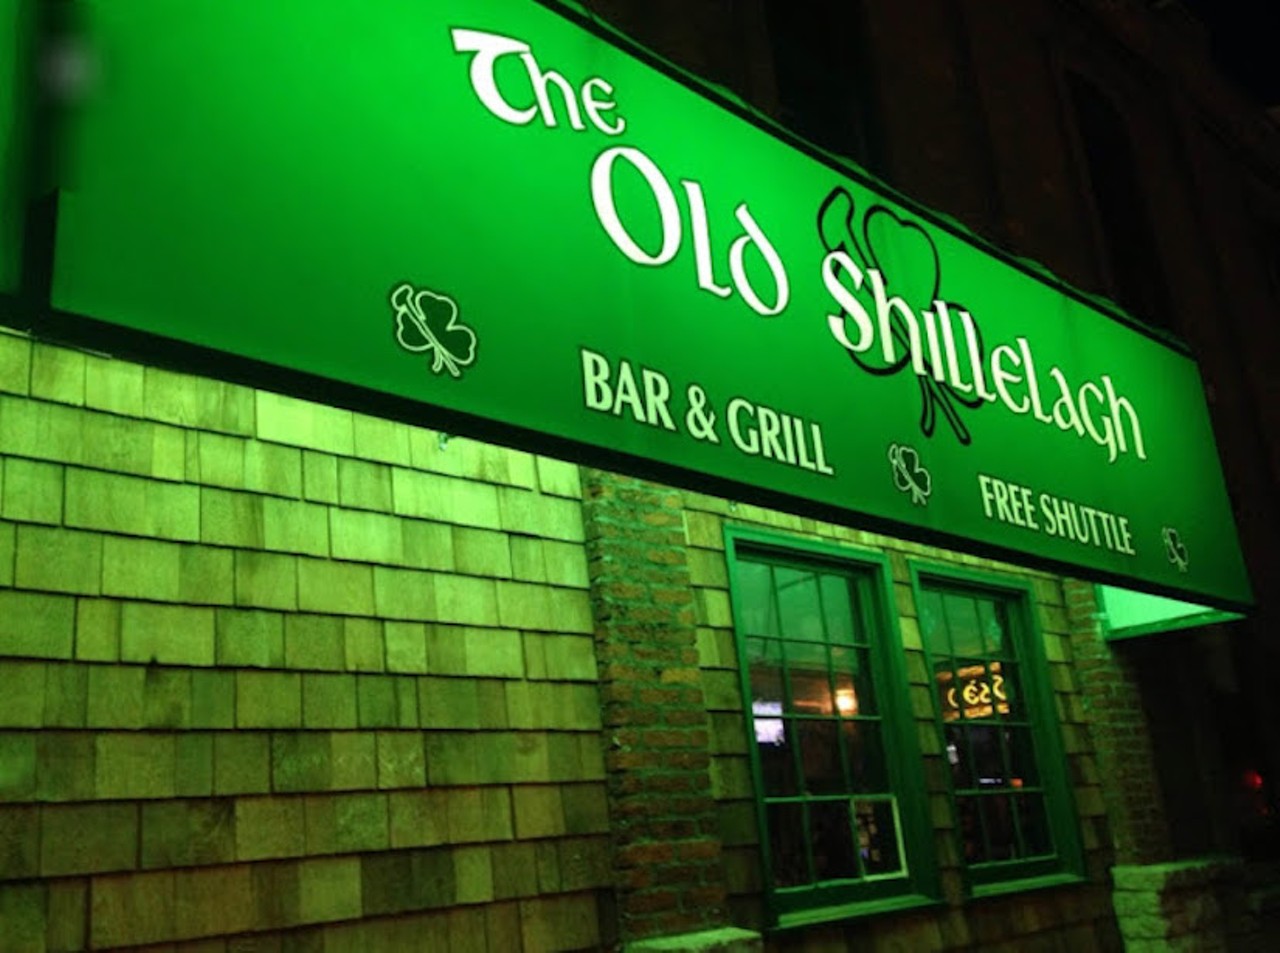 Old Shillelagh 
349 Monroe St., Detroit; 313-964-0007; oldshillelagh.com
An Irish Pub in Greektown. While this spot is a favorite on game days, its casual vibes can make striking up a conversation with a stranger very easy.